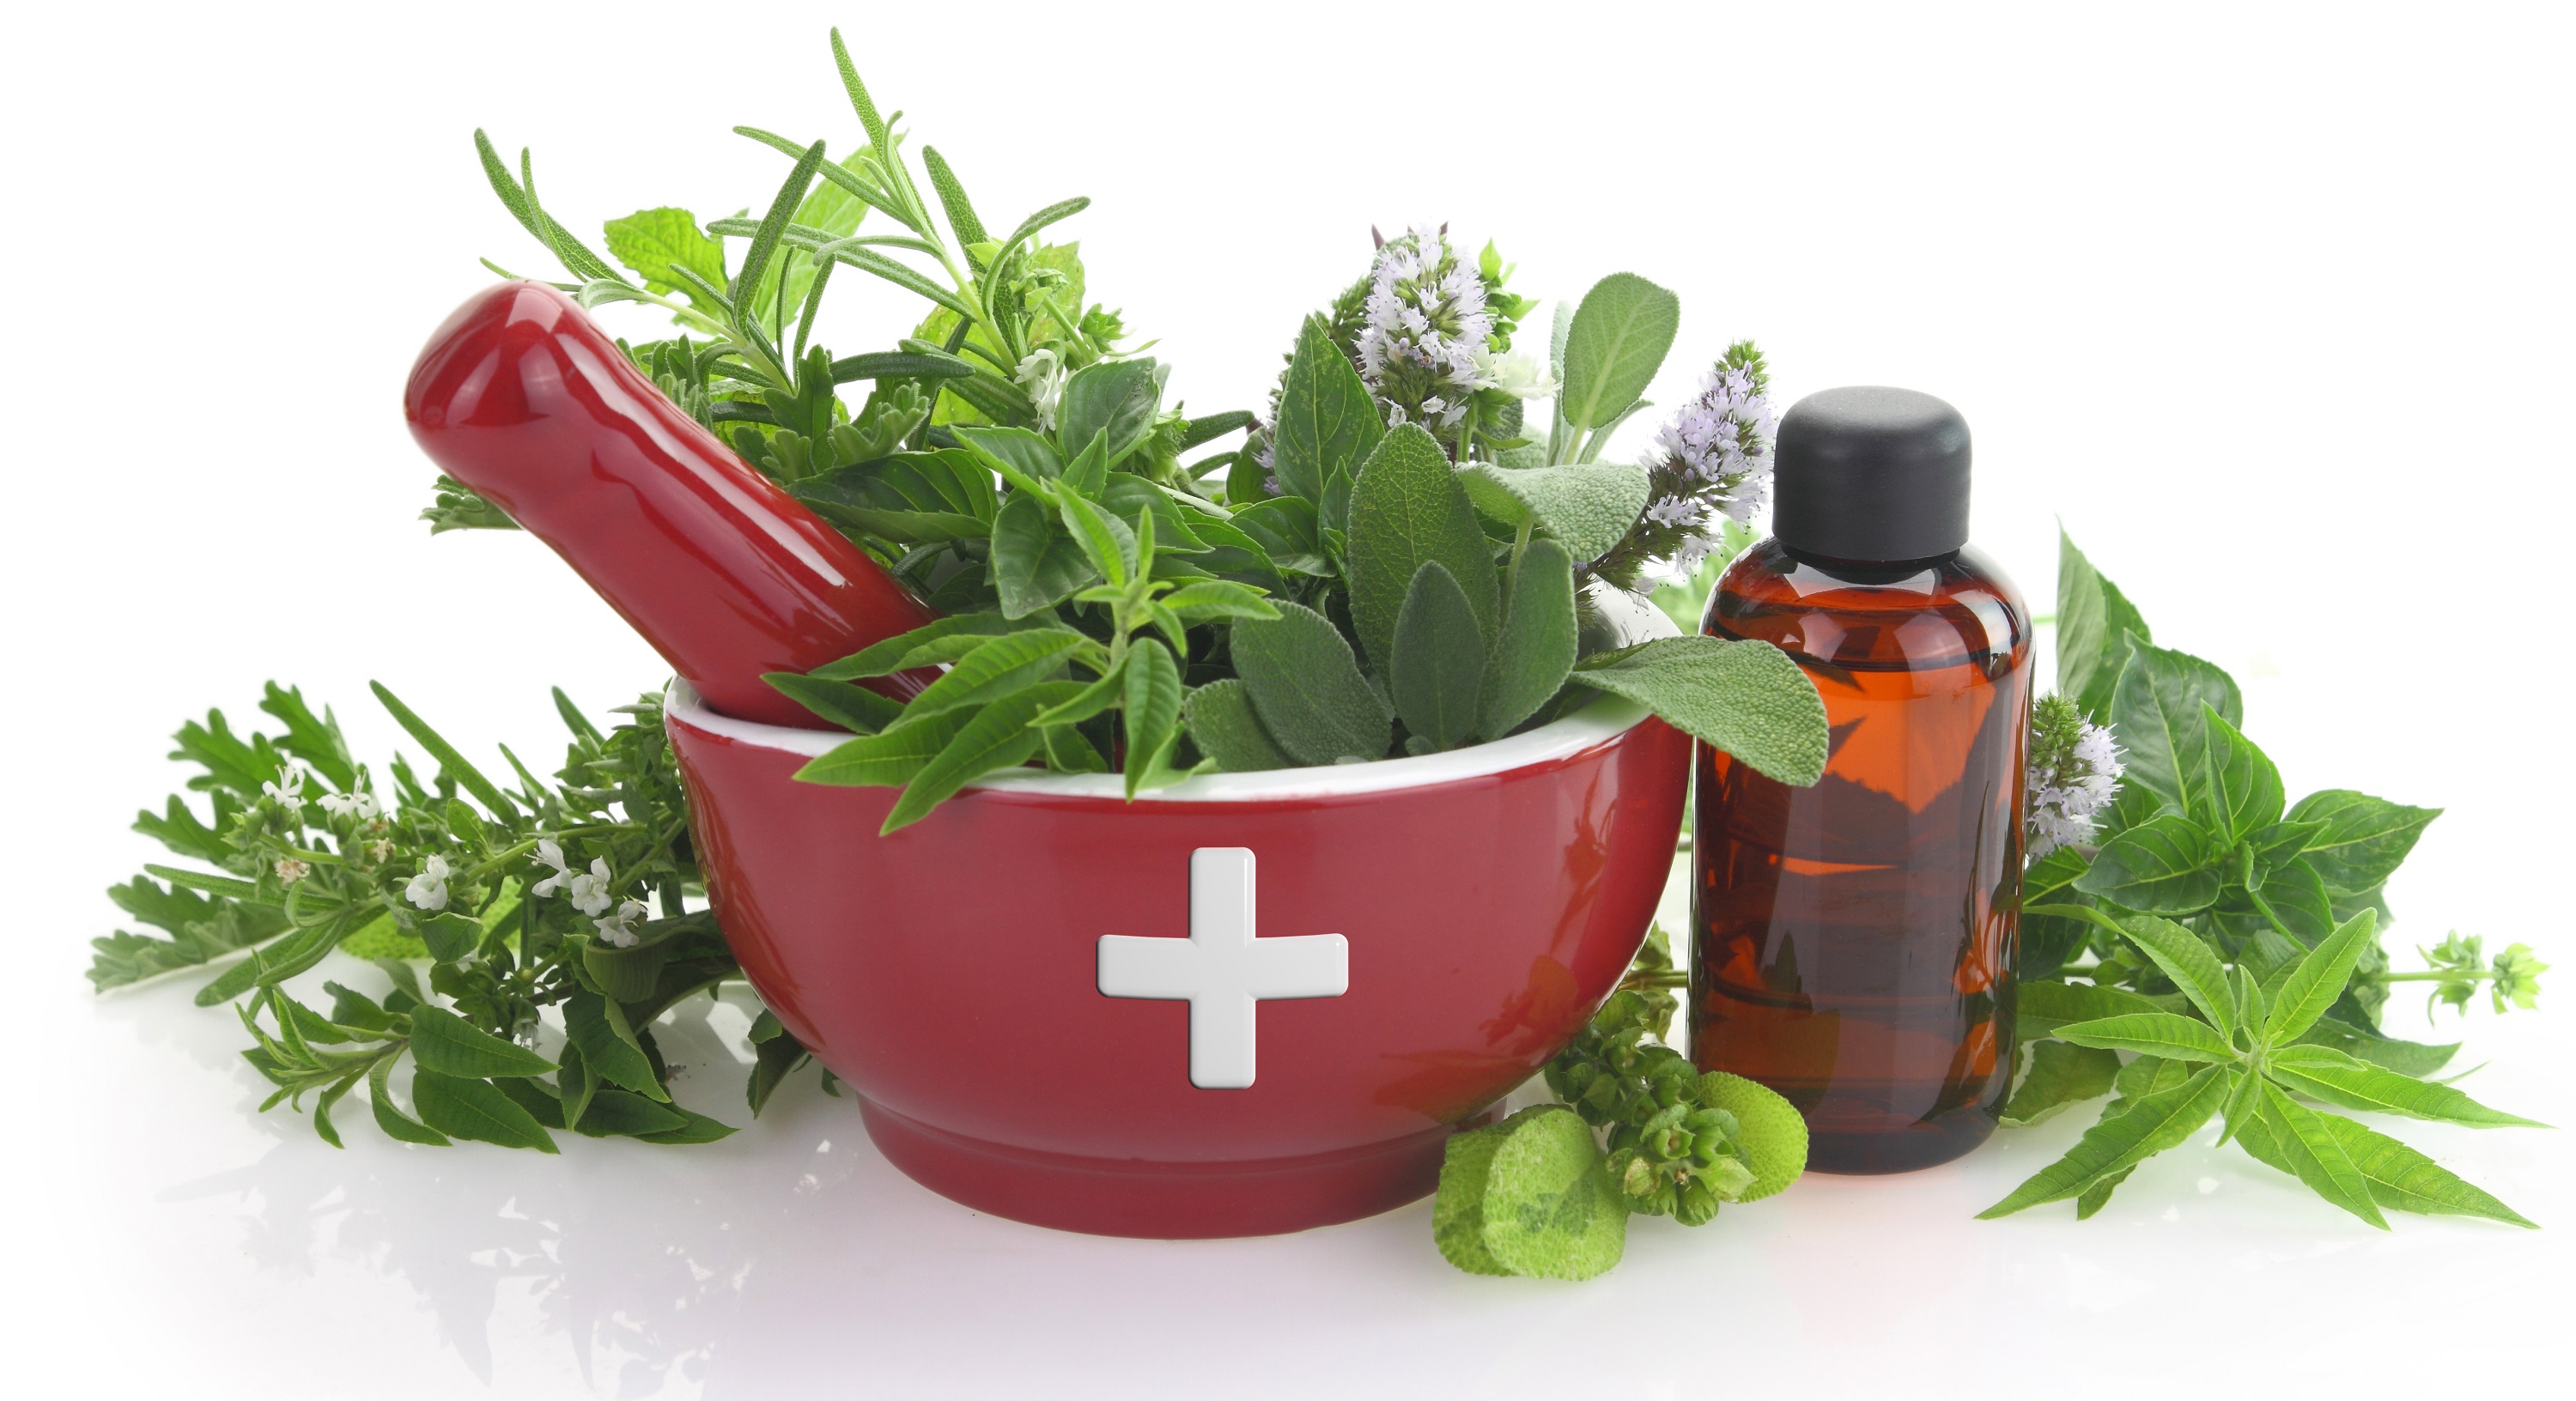 Mortar with medicine cross, fresh herbs and essential oil bottle